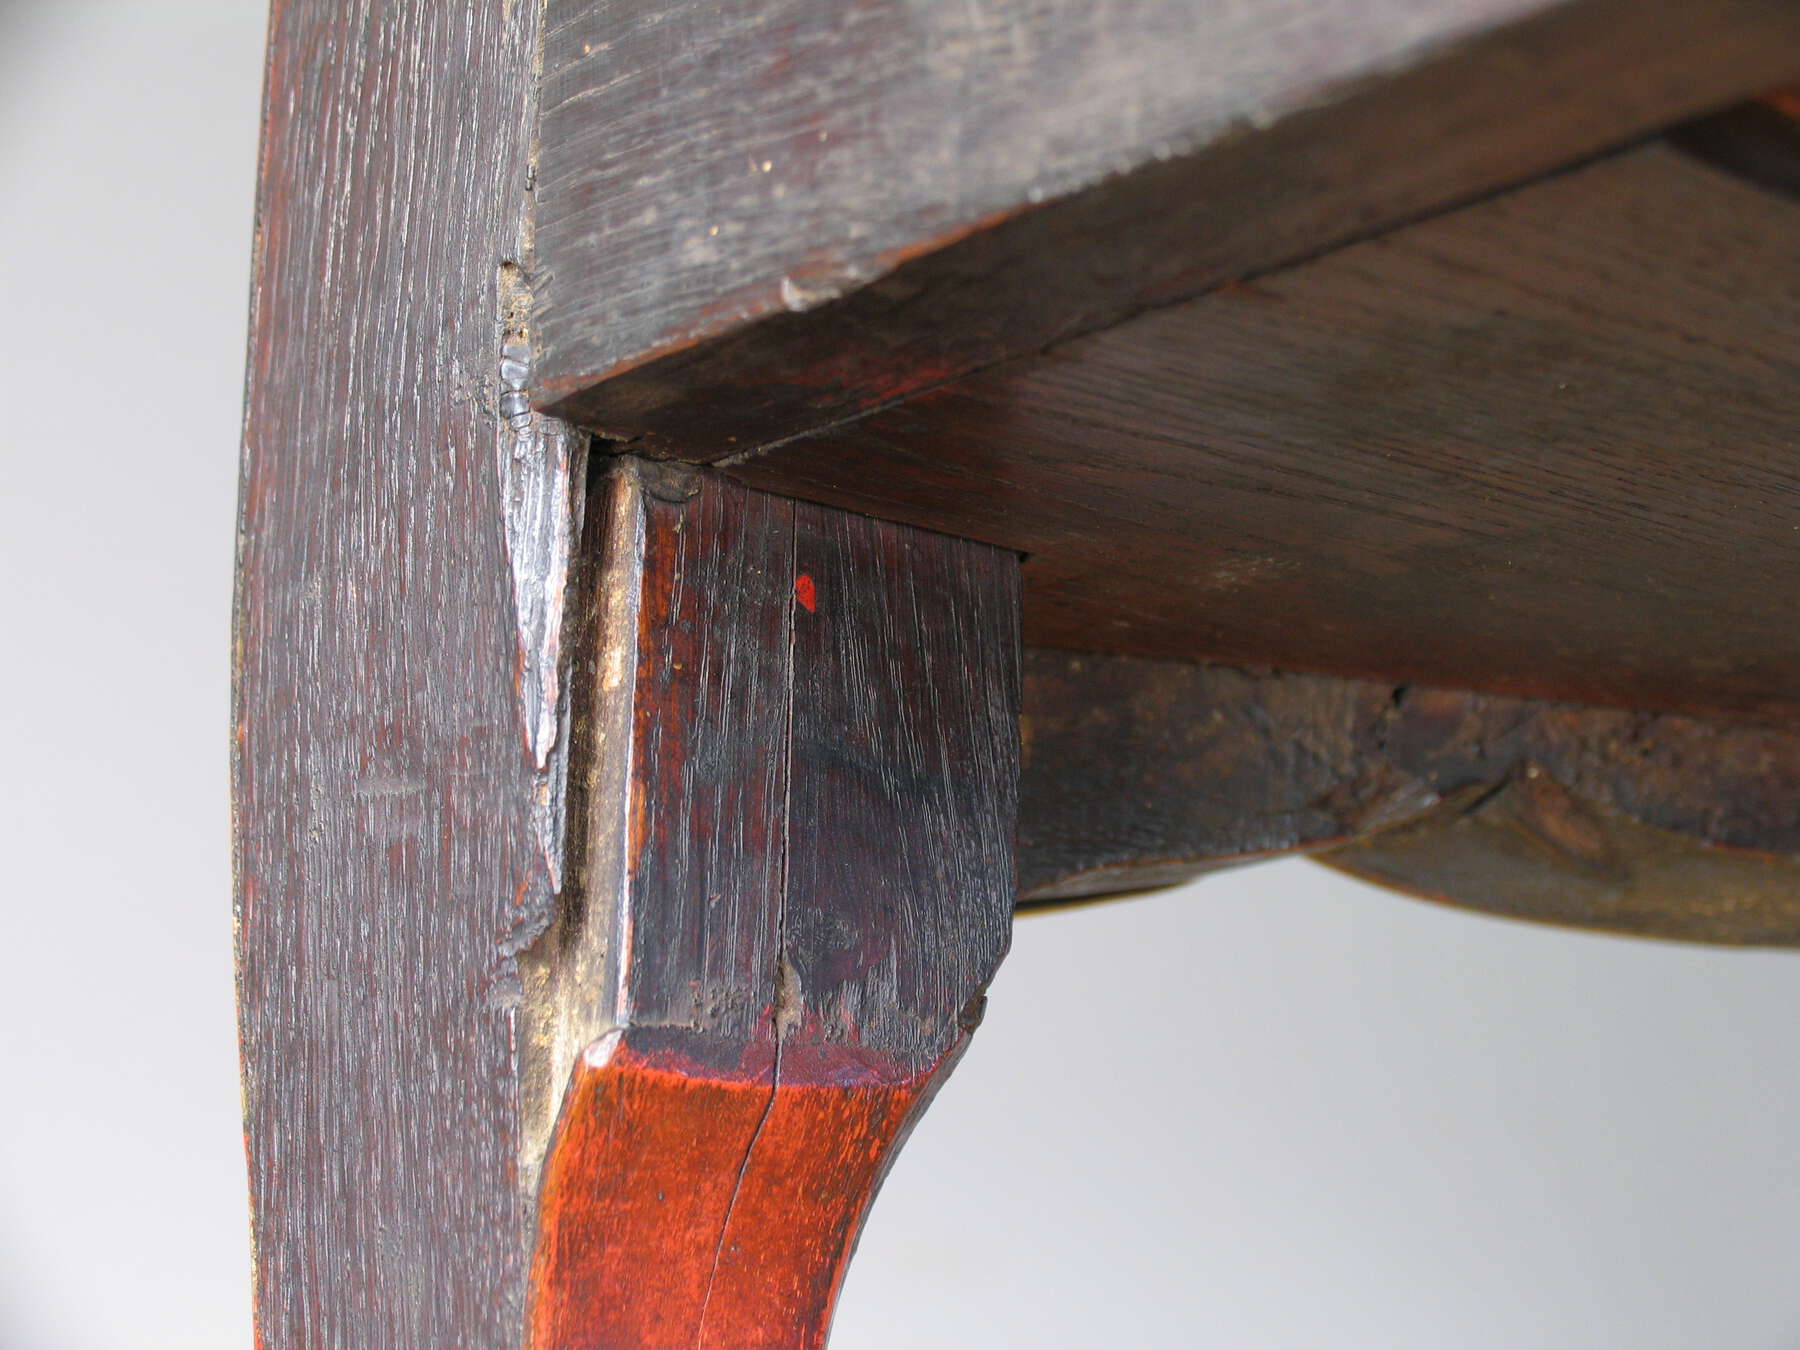 detail of one of the commode legs, showing the wood grain, underside of the desk, and a long vertical crease running down the leg